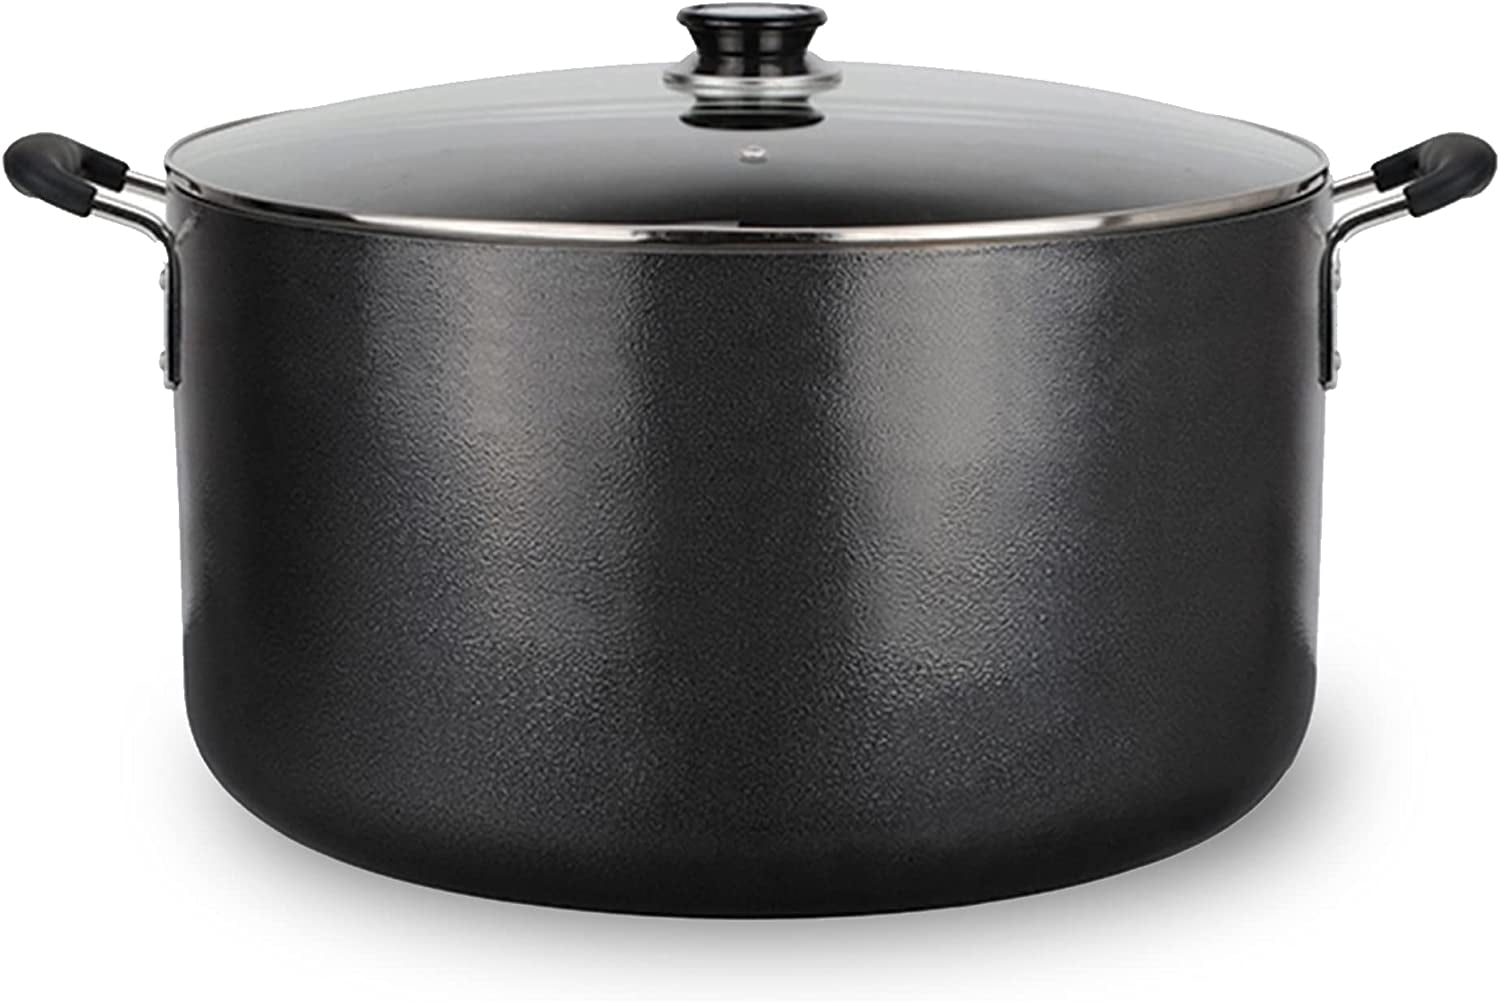 Alpine Cuisine 13-Quart Aluminum Caldero Stock Pot with Glass Lid, Cooking  Dutch Oven Performance for Even Heat Distribution, Perfect for Serving  Large & Small Groups, Riveted Handles Commercial Grade 